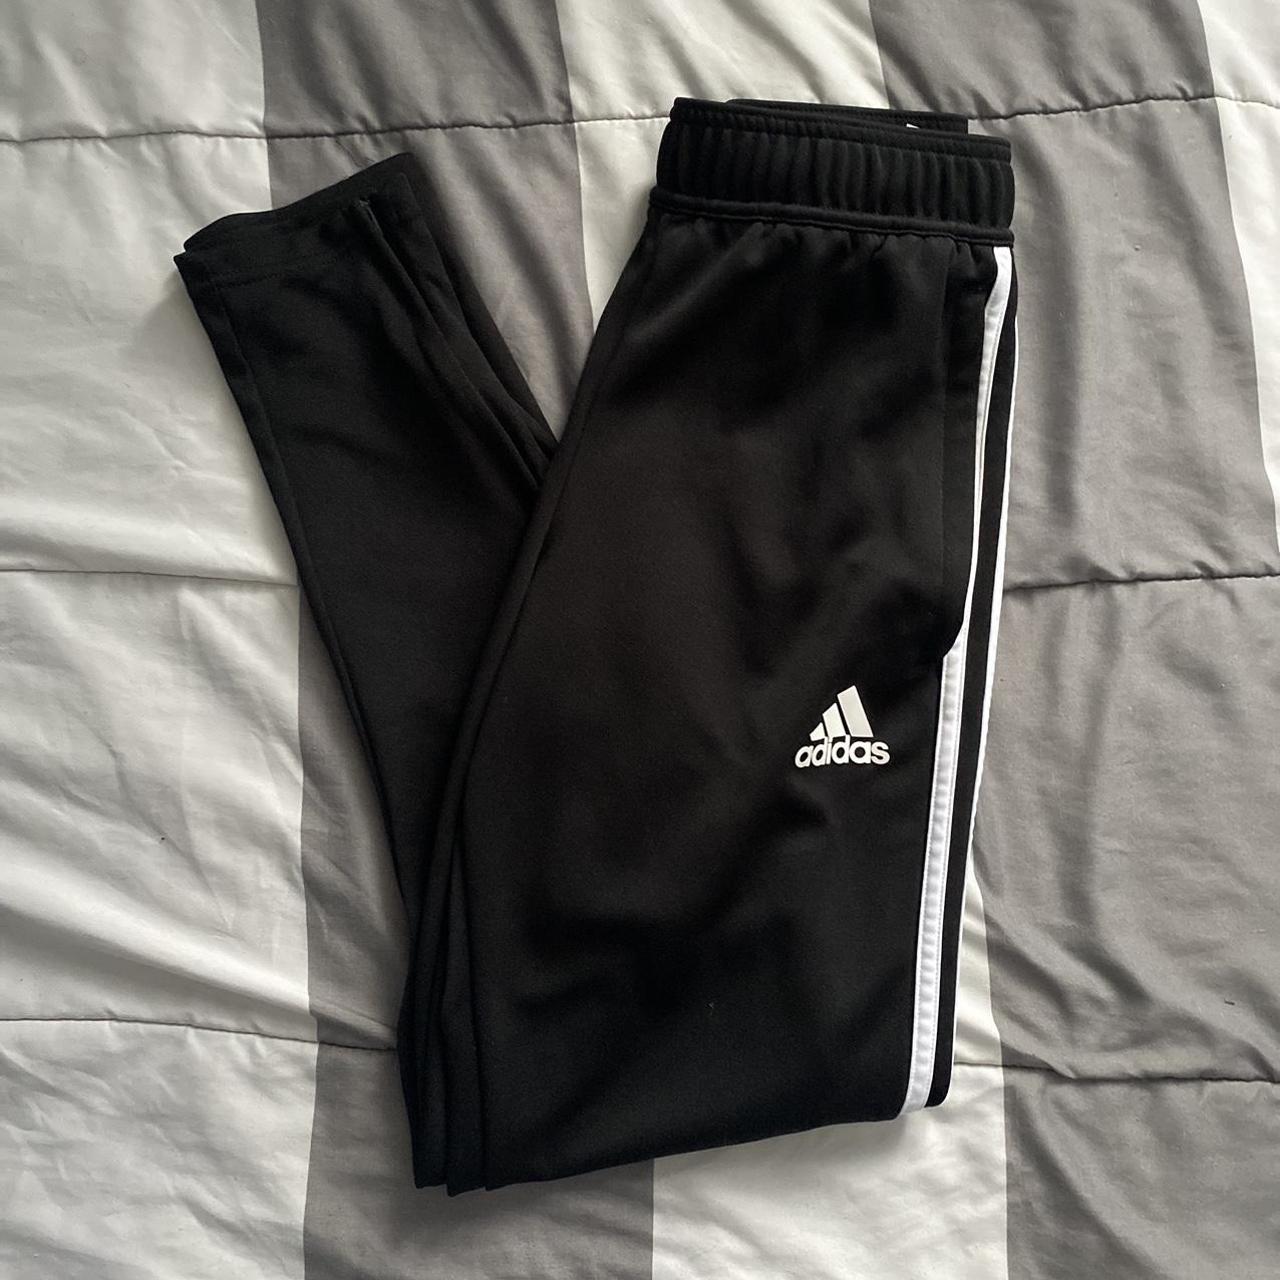 Adidas Men's Black and White Joggers-tracksuits